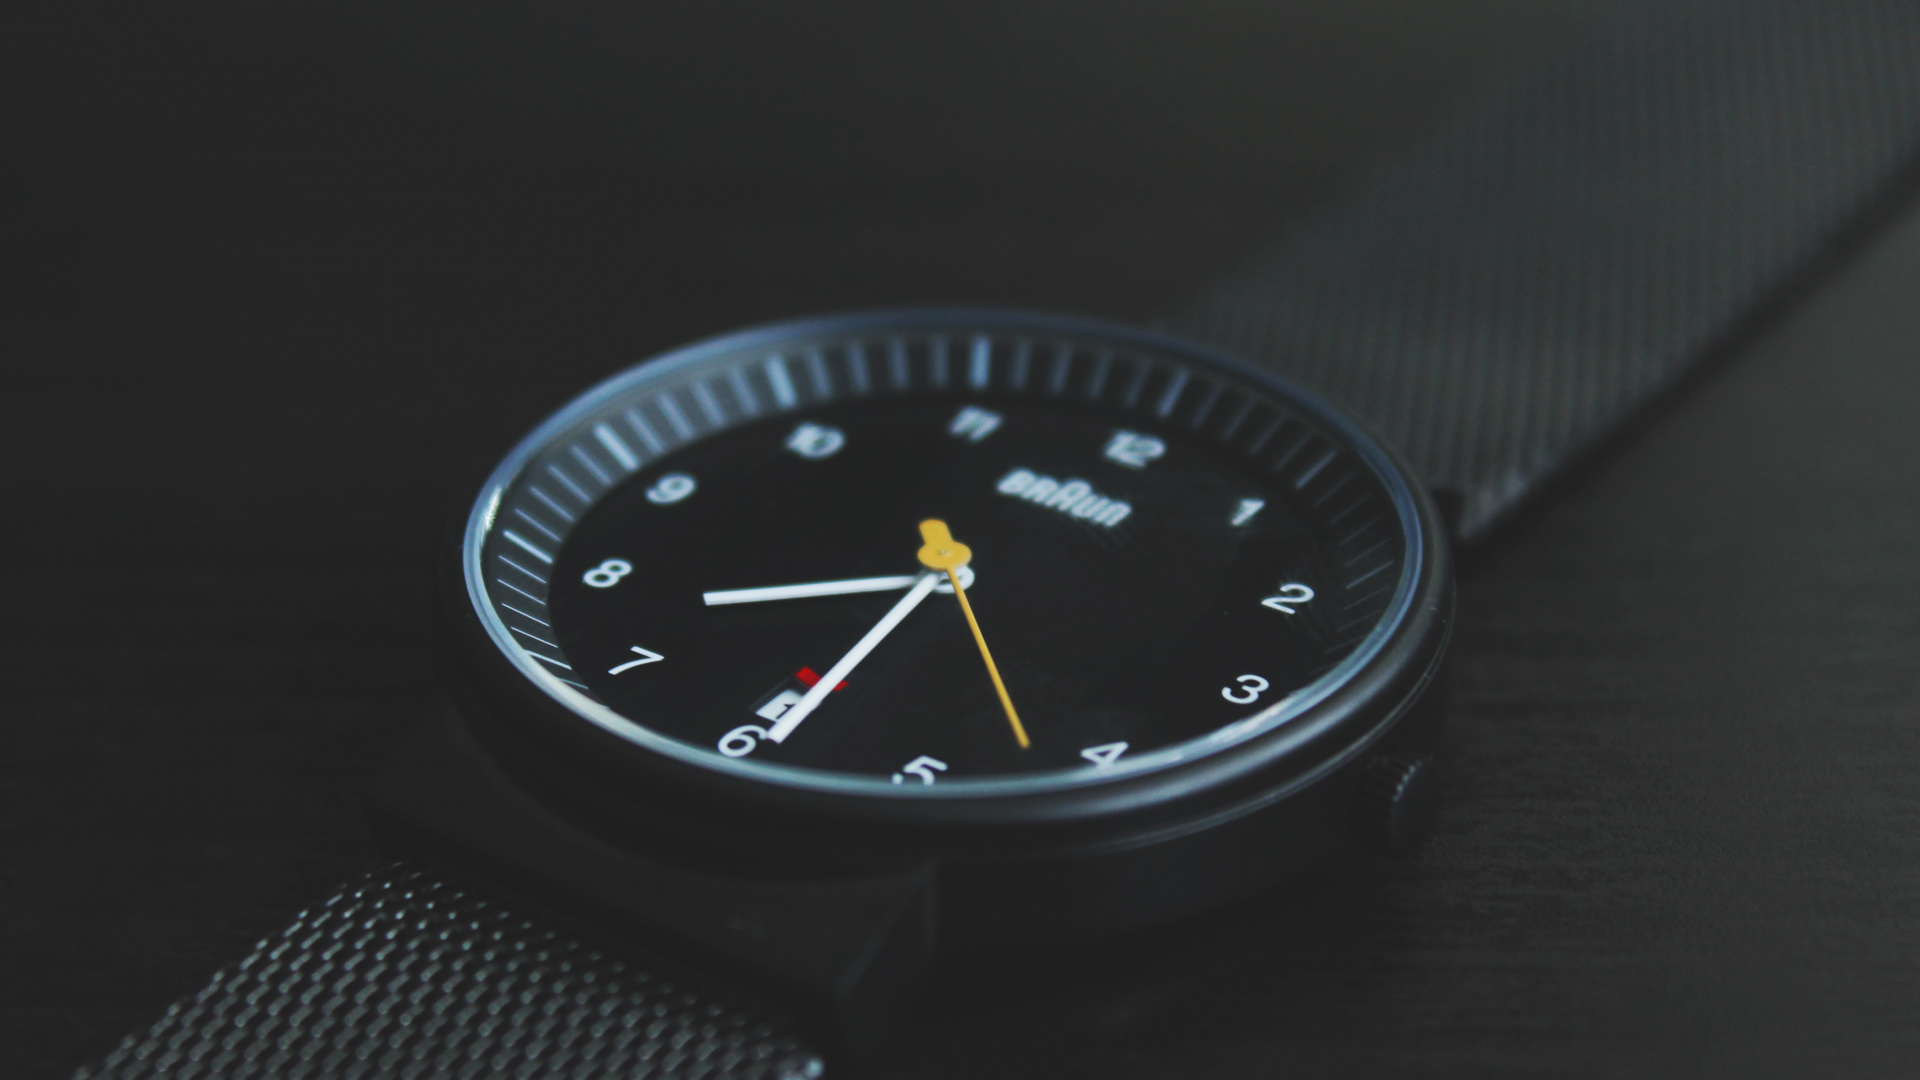 Black Analog Watch at 10 00. Wallpaper in 1920x1080 Resolution